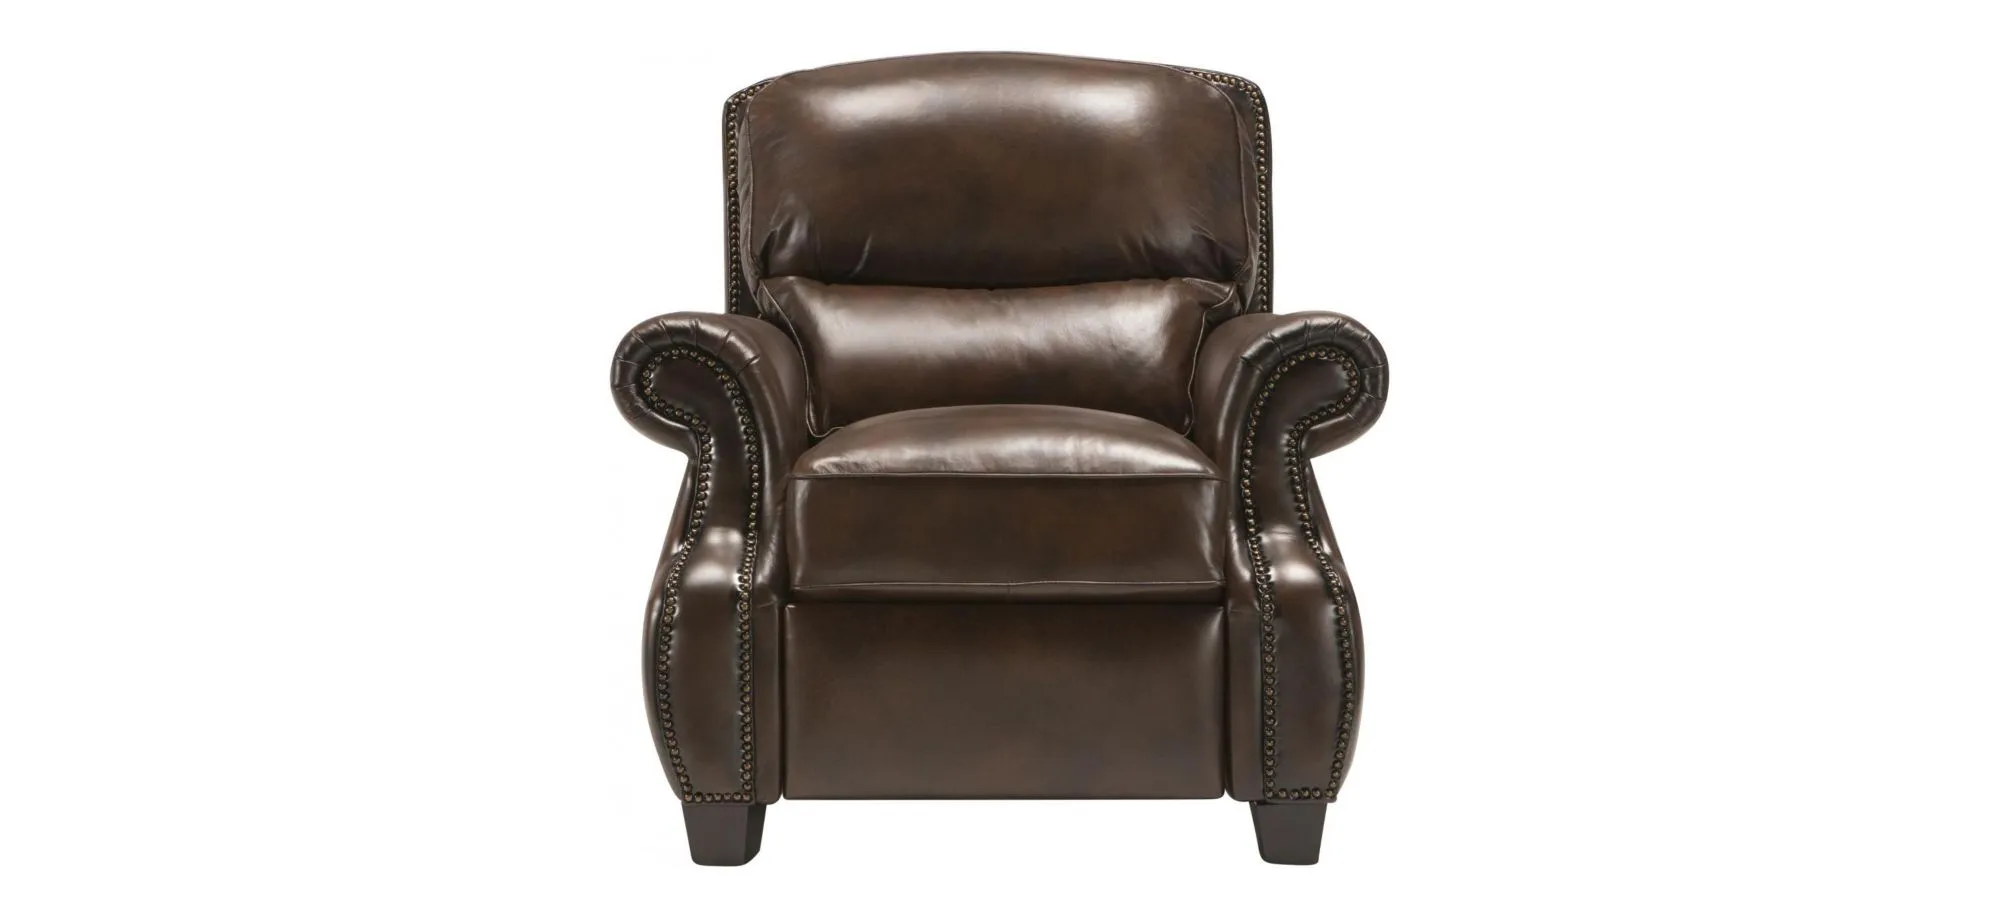 Romano Leather Recliner in Antique Tobacco by Bellanest